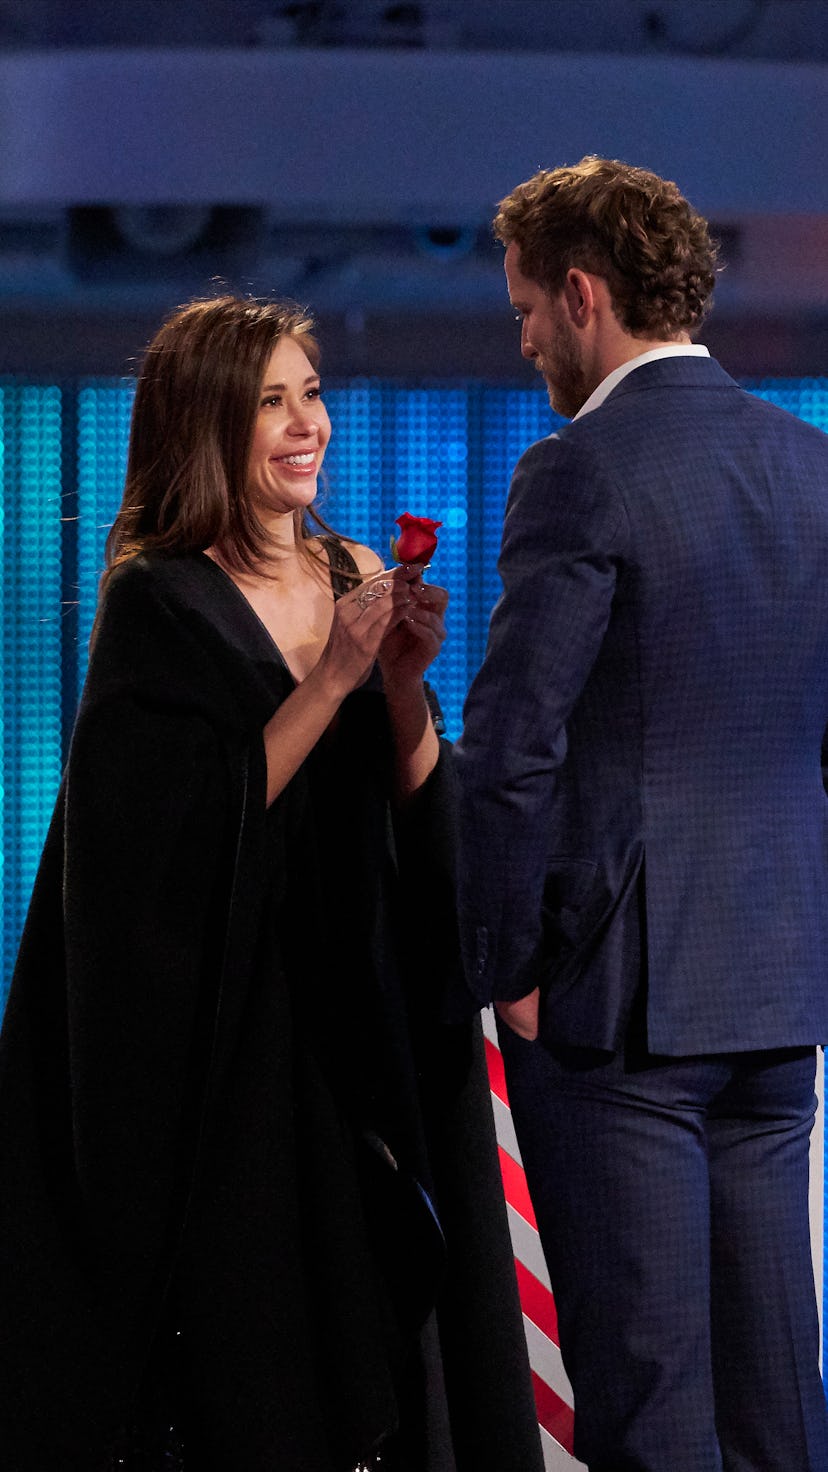 Gabby Windey and Erich Schwer on Season 19 of ABC's 'The Bachelorette'